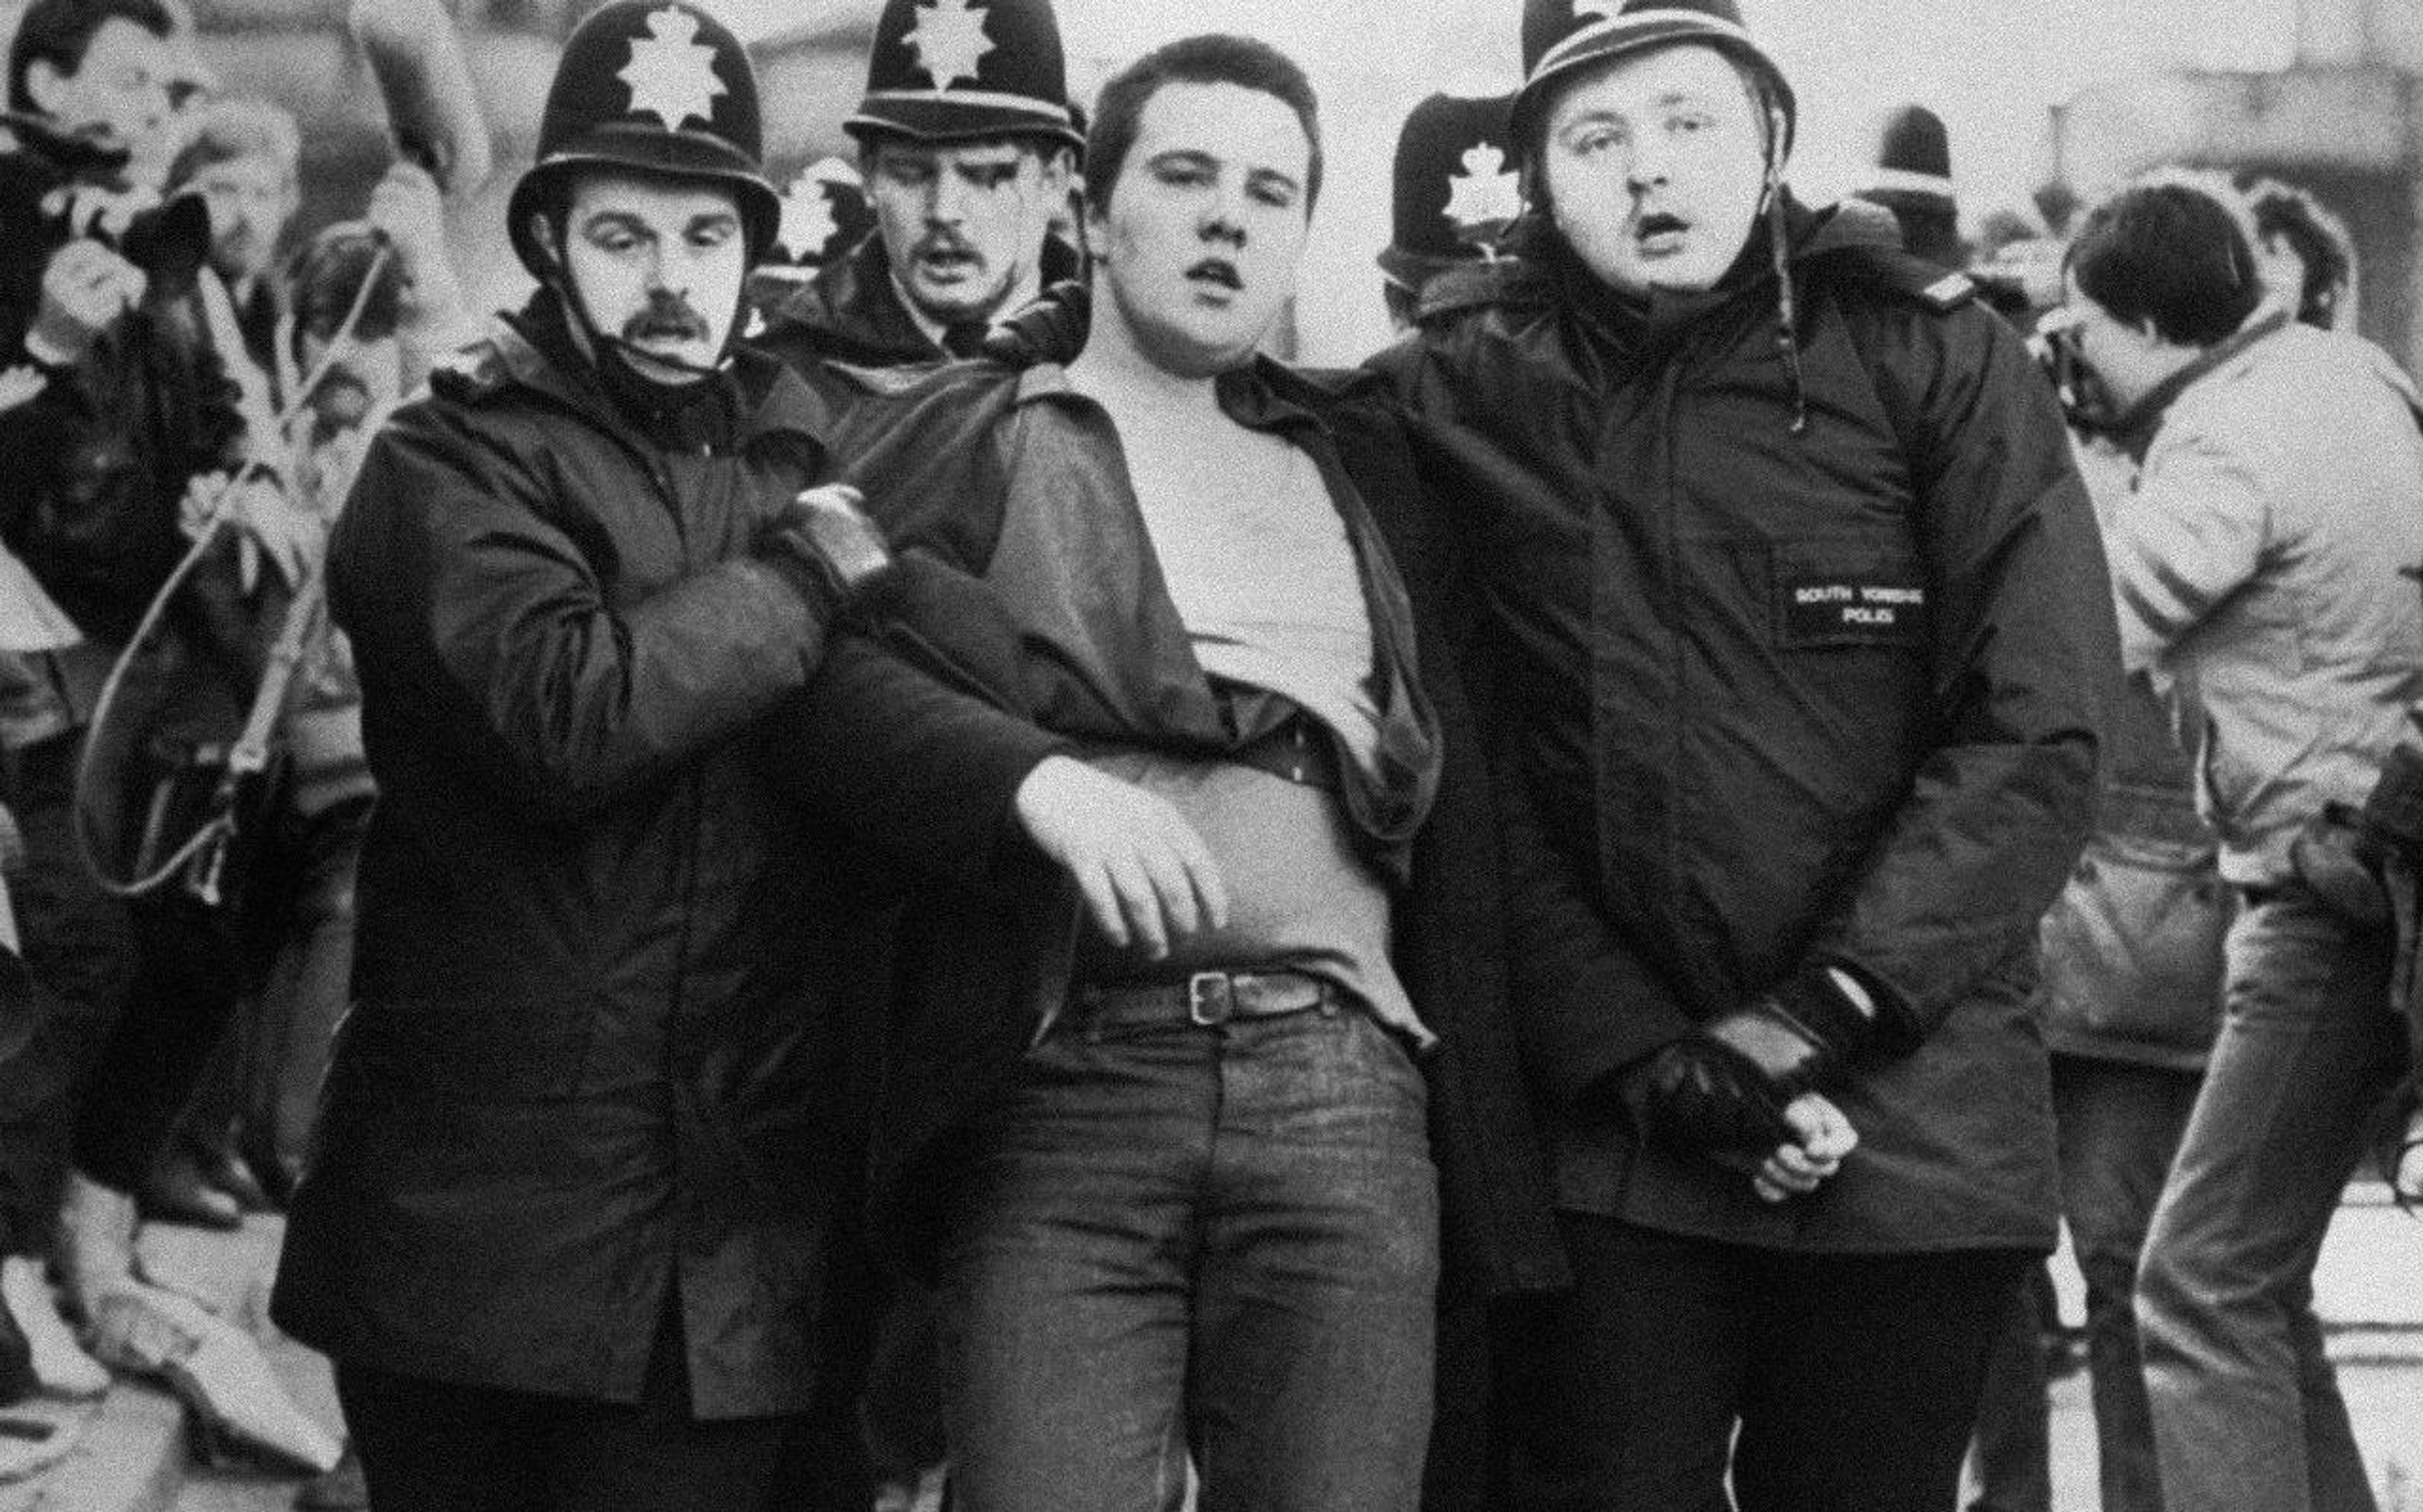 Image of the Battle of Orgreave, a violent confrontation between police and pickets during the 1984-85 UK miner&#39;s strike in Oregreave, Yorkshire, UK